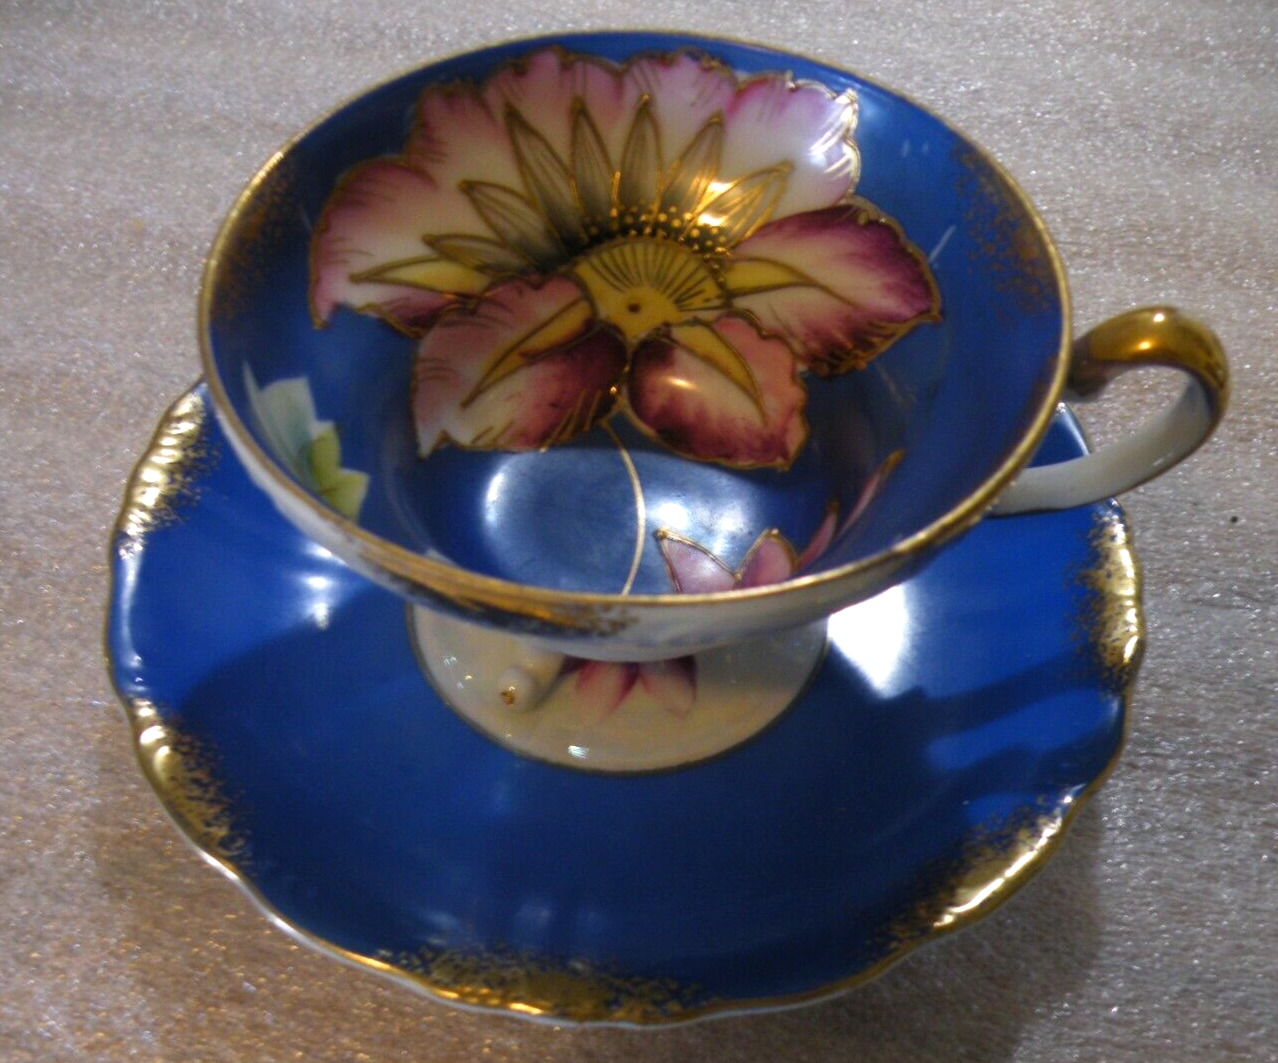 Vintage Teacup and Saucer -Royal Sealy China, Made in Japan, Hand Painted